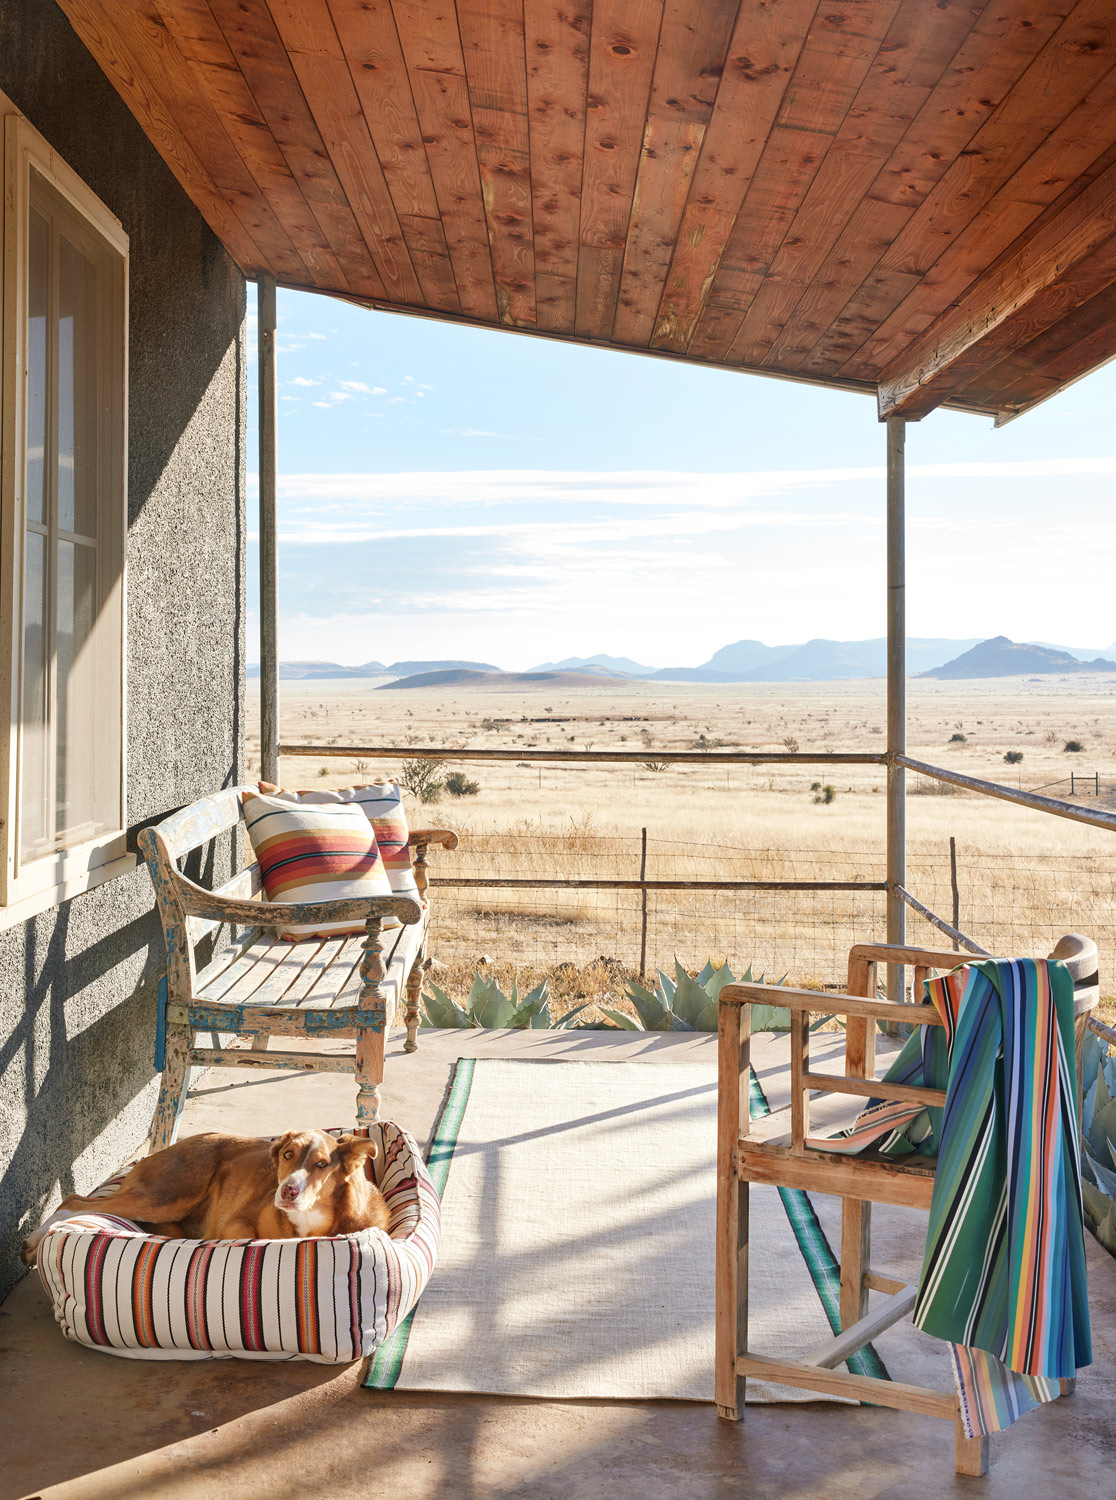 Perennial fabrics at the home of Liz Lambert in Marfa, Texas by Austin based lifestyle photographer Buff Strickland